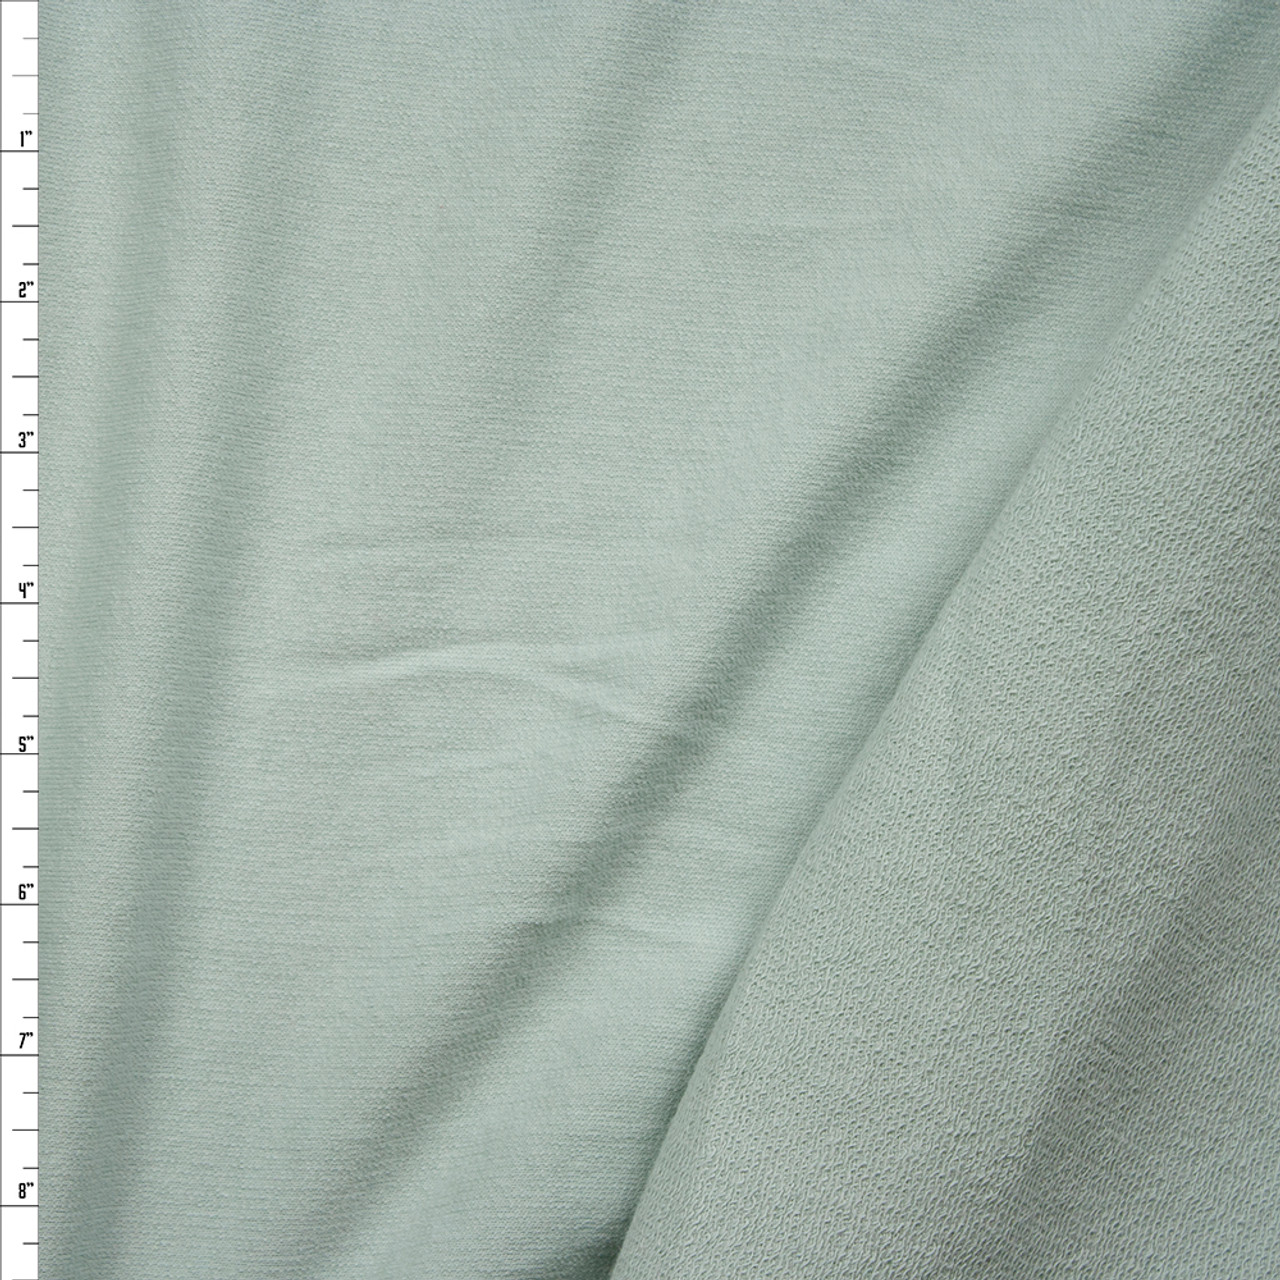 Light Sage TERRY Cloth Fluffy Fabric by the Yard, Soft Hand Feel With  Medium Weightlimited Yards Offer 